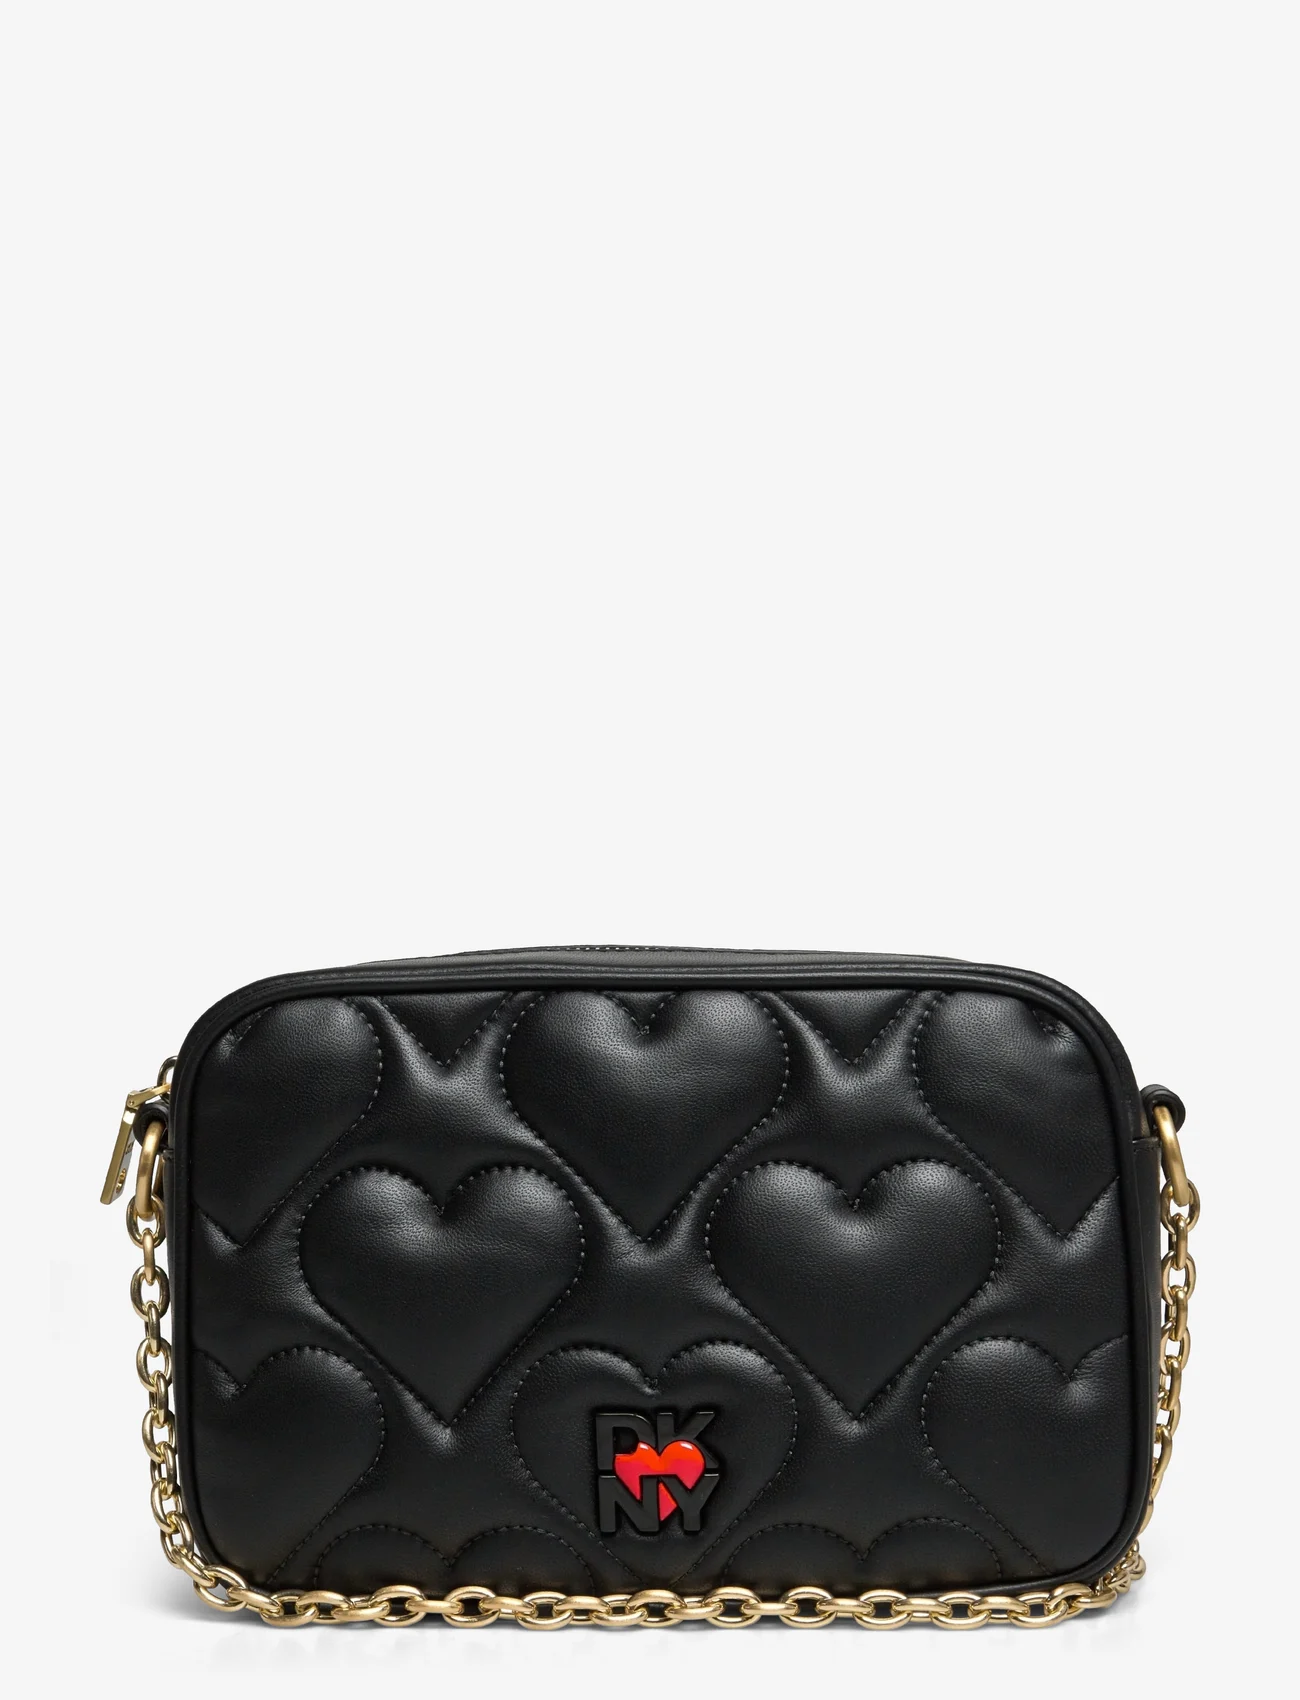 DKNY Bags - HEART OF NY QUILTED BAG - konfirmation - bgd - blk/gold - 0